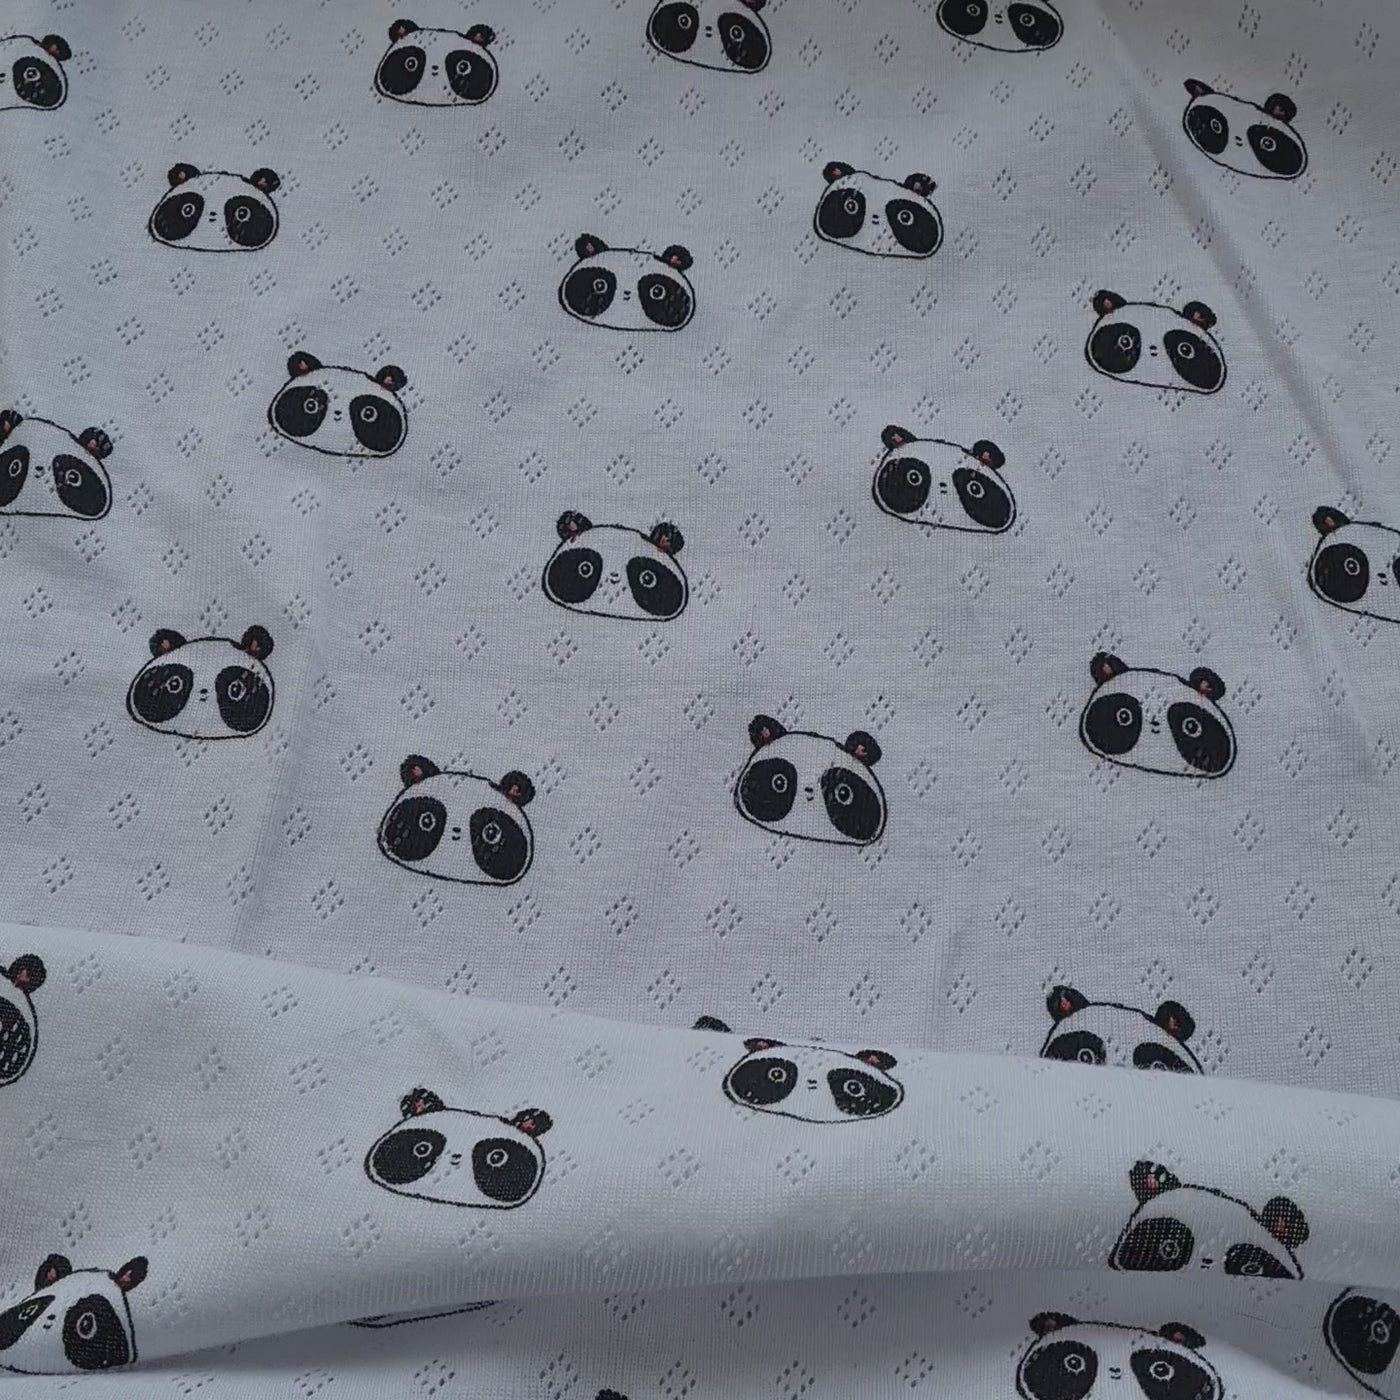 Panda Fine 100% cotton jersey knit with Diamond openwork/ Pointelle fabric. By Poppy. Cut to order by the 1/2 metre.